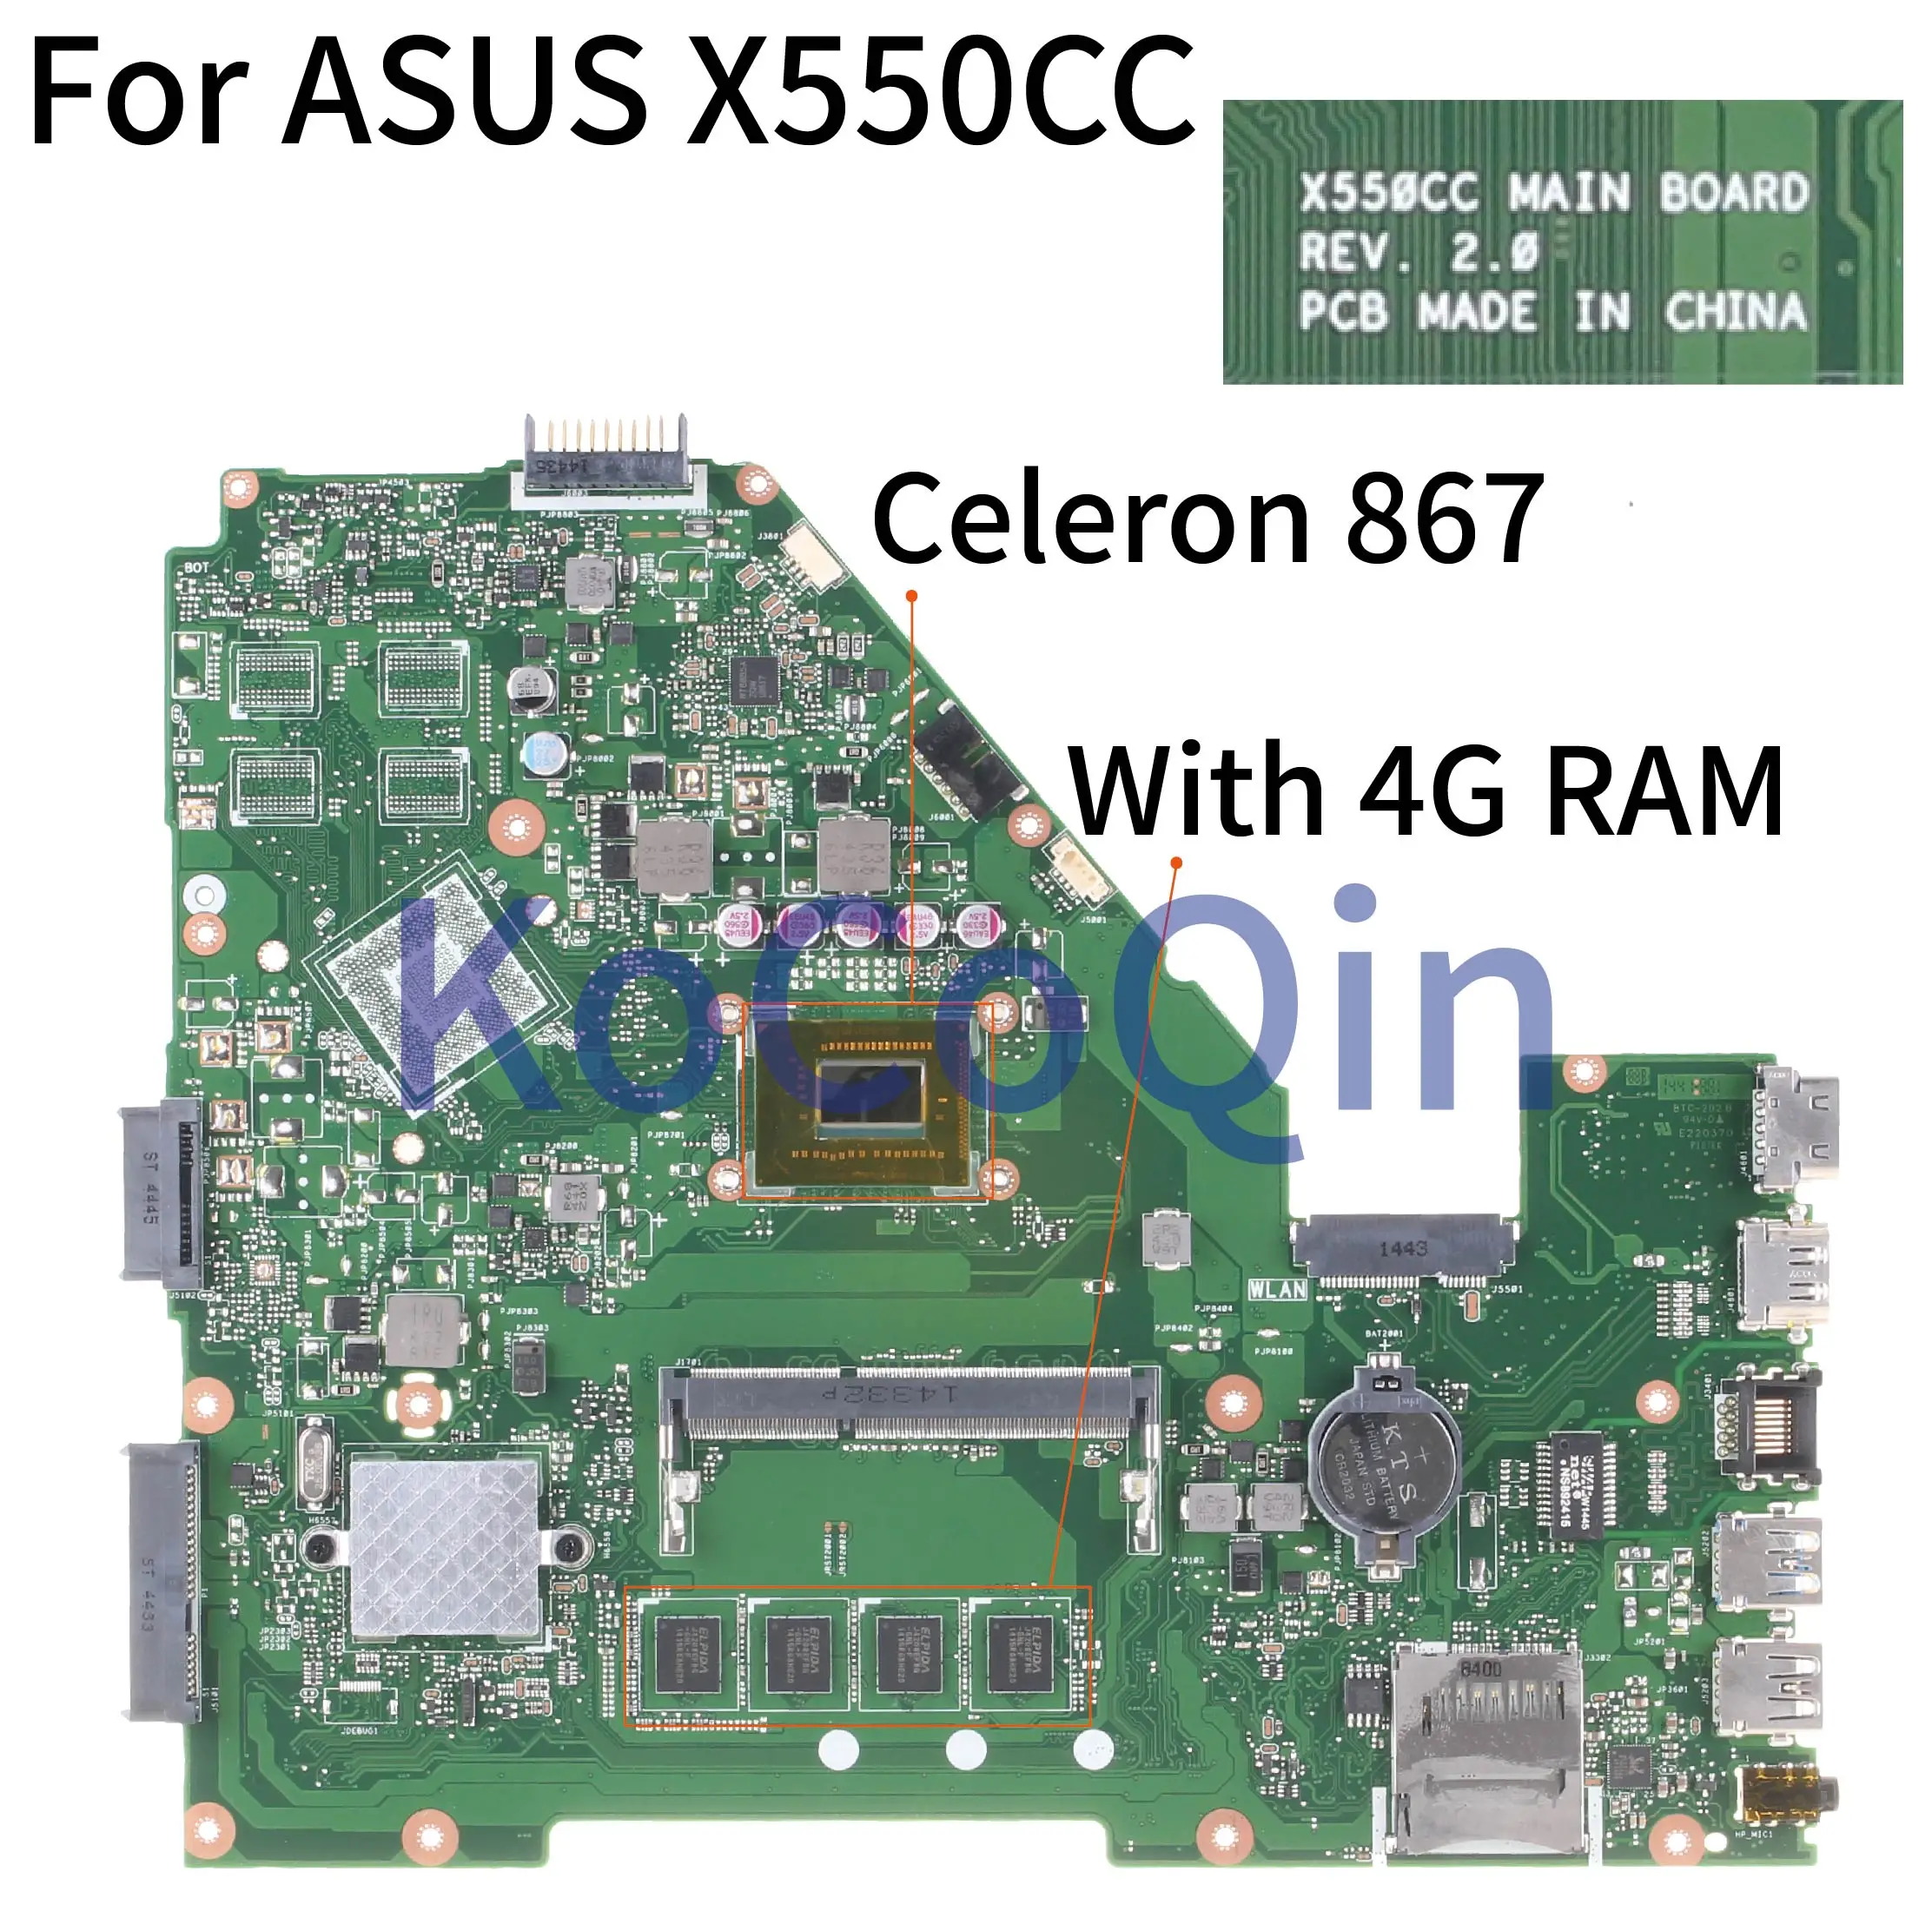 

KoCoQin Laptop motherboard For ASUS X550CA X550CC X550CL R510C Y581C X550C X550 Mainboard REV:2.0 SR0V3 Celeron 867 With 4G RAM